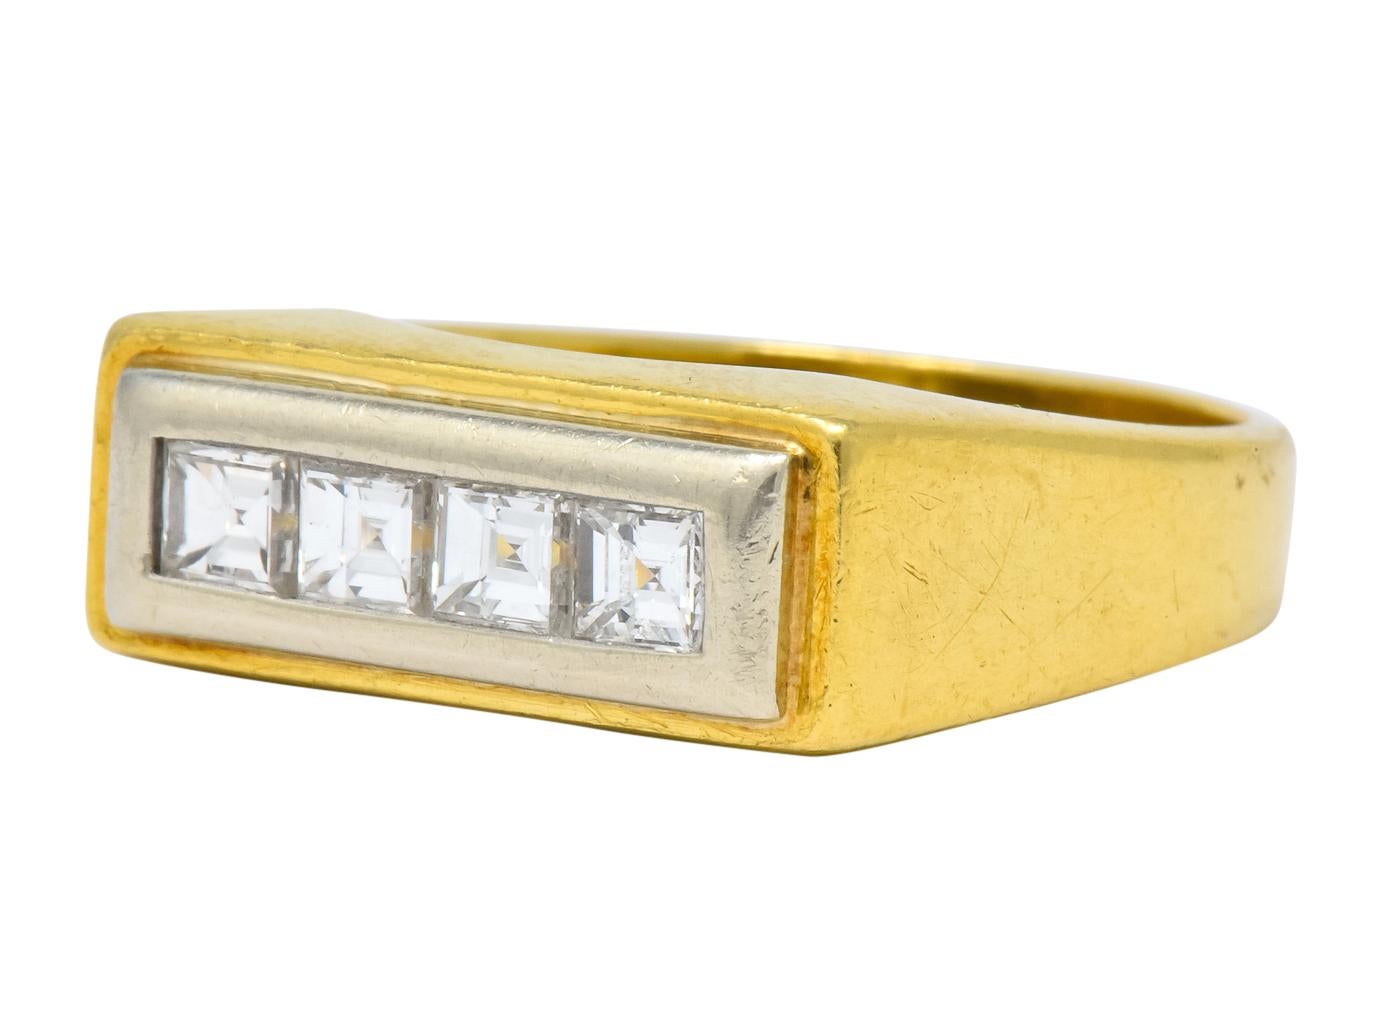 East to West rectangular band ring designed as platinum surrounded by gold

Channel set with four square step cut diamonds

Weighing in total approximately 0.72 carat with G/H color and 

Stamped 18K for 18 karat gold

Circa: 1970

Ring Size: 10 &